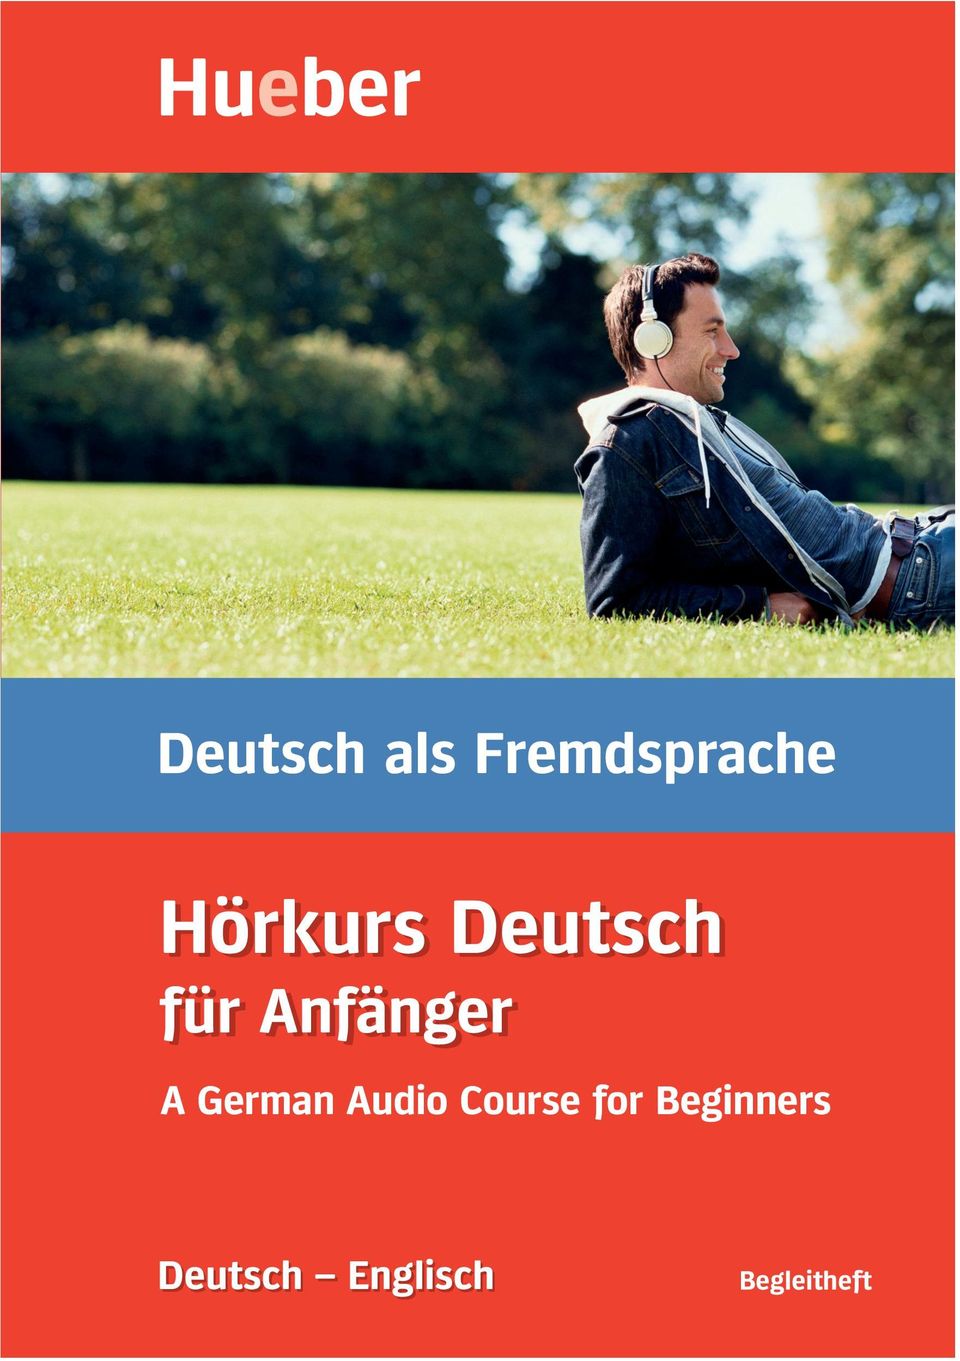 German Audio Course for